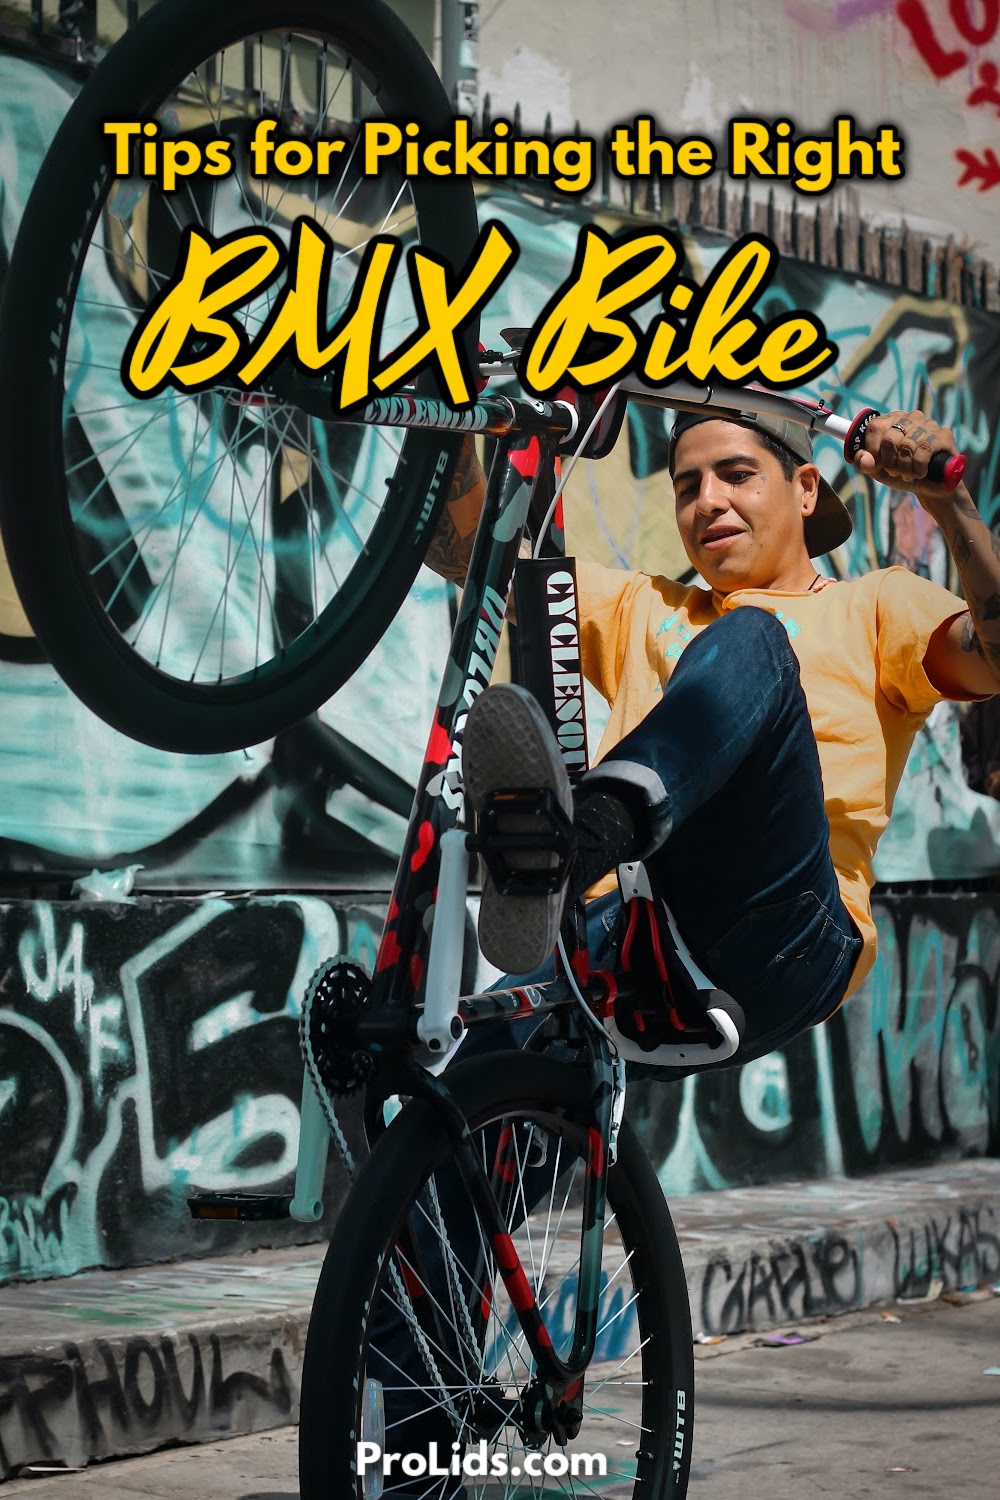 There are some simple tips for picking the right BMX bike that will help you find the perfect fitting bike for your needs.